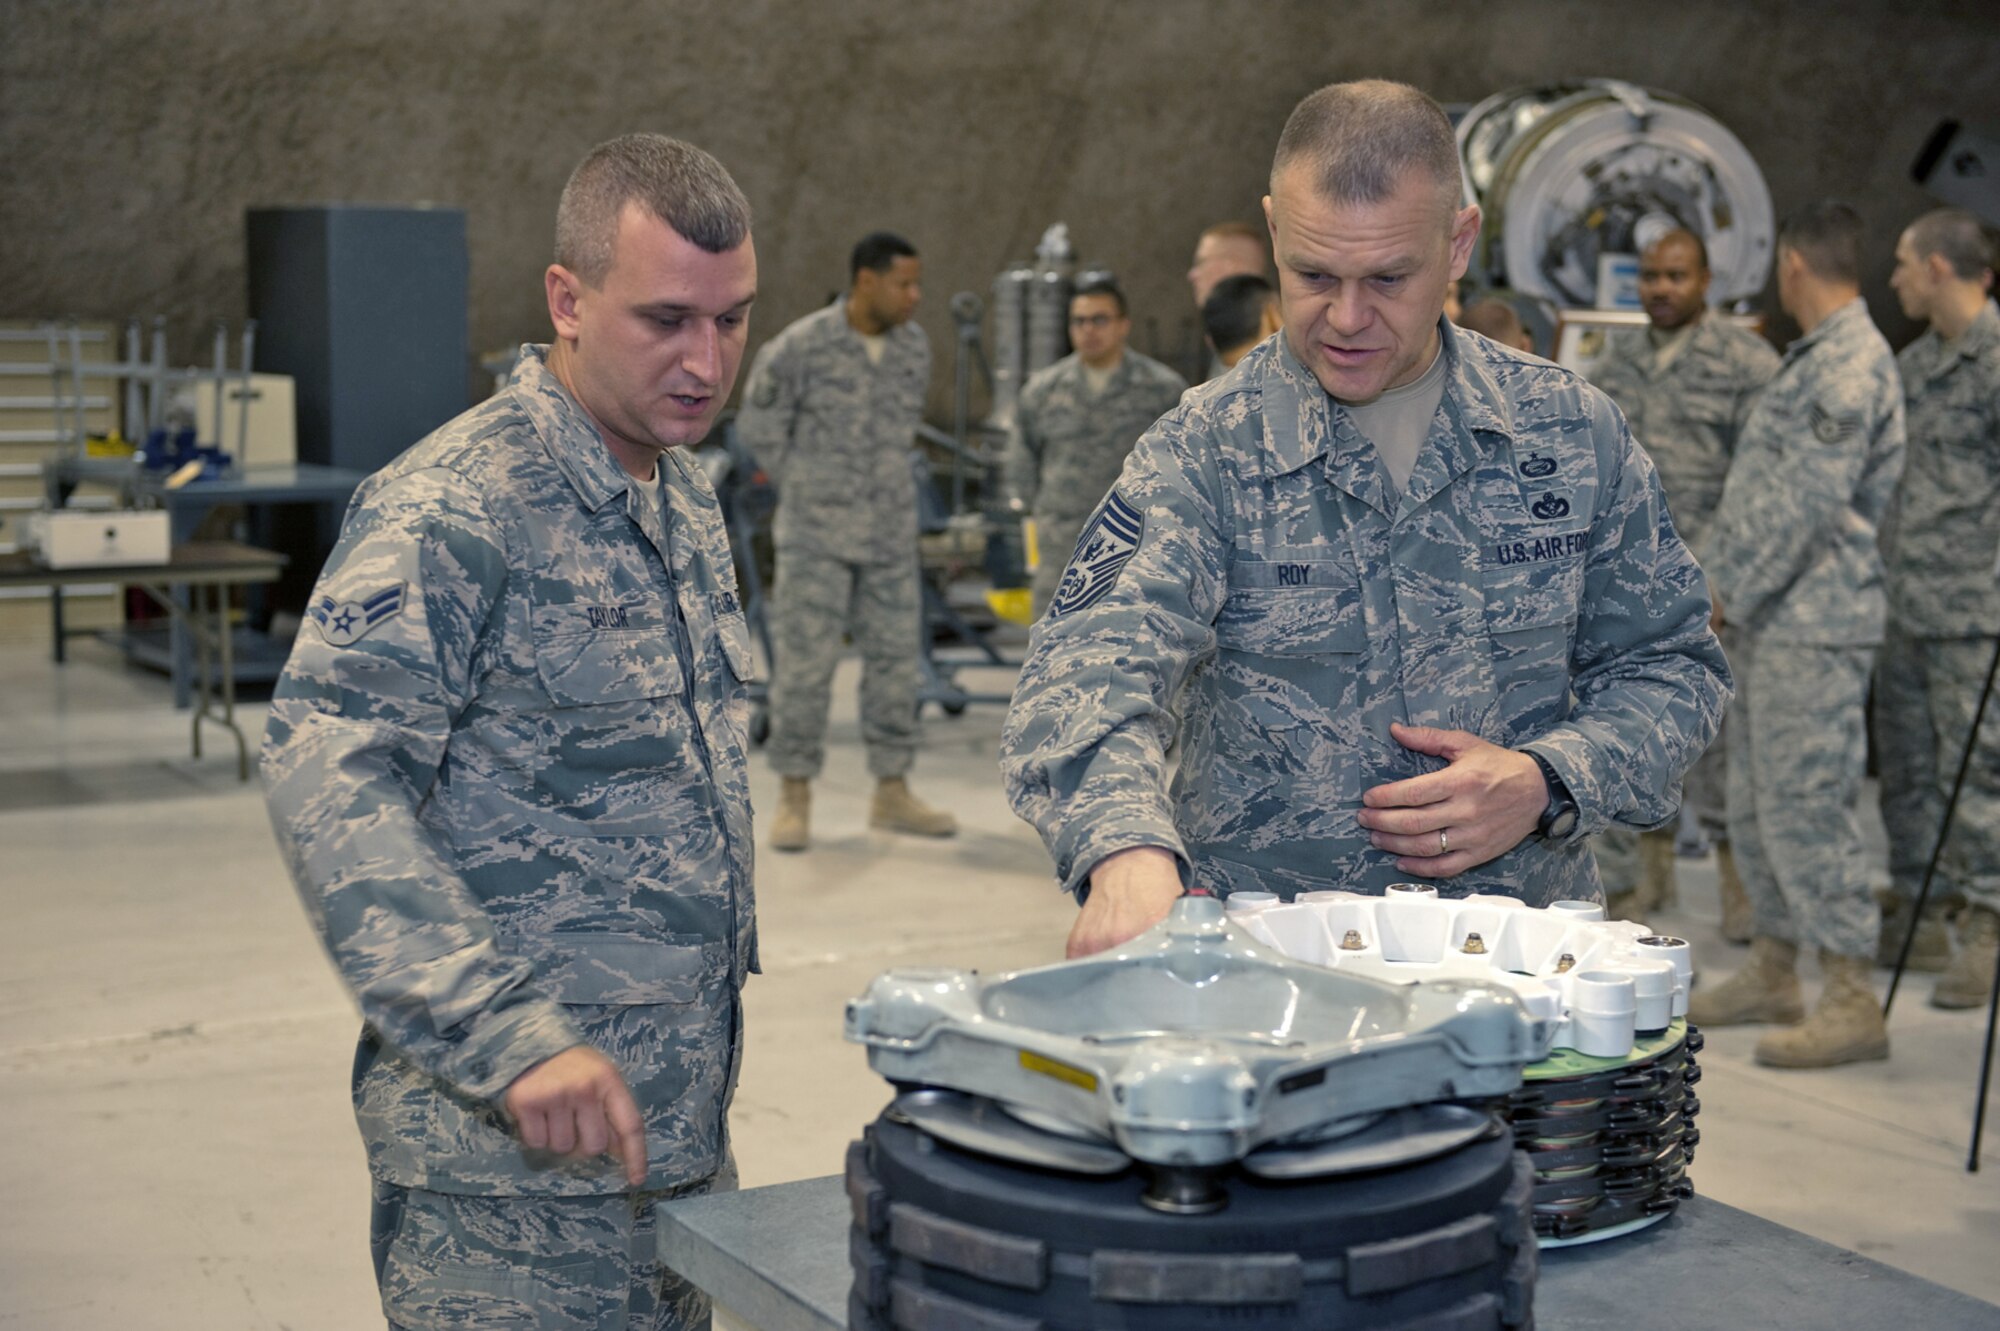 Chief Master Sgt. of the Air Force James A. Roy receives a briefing from Airman 1st Class Marcus Taylor about his role in maintaining aircraft brakes, Nov. 30, 2009. Chief Roy is touring the U.S. Air Forces Central Command area of responsibility, visiting with Airmen and addressing numerous issues affecting servicemembers who are deployed in support of operations Iraqi Freedom and Enduring Freedom. (U.S. Air Force photo/Staff Sgt. Robert Barney)